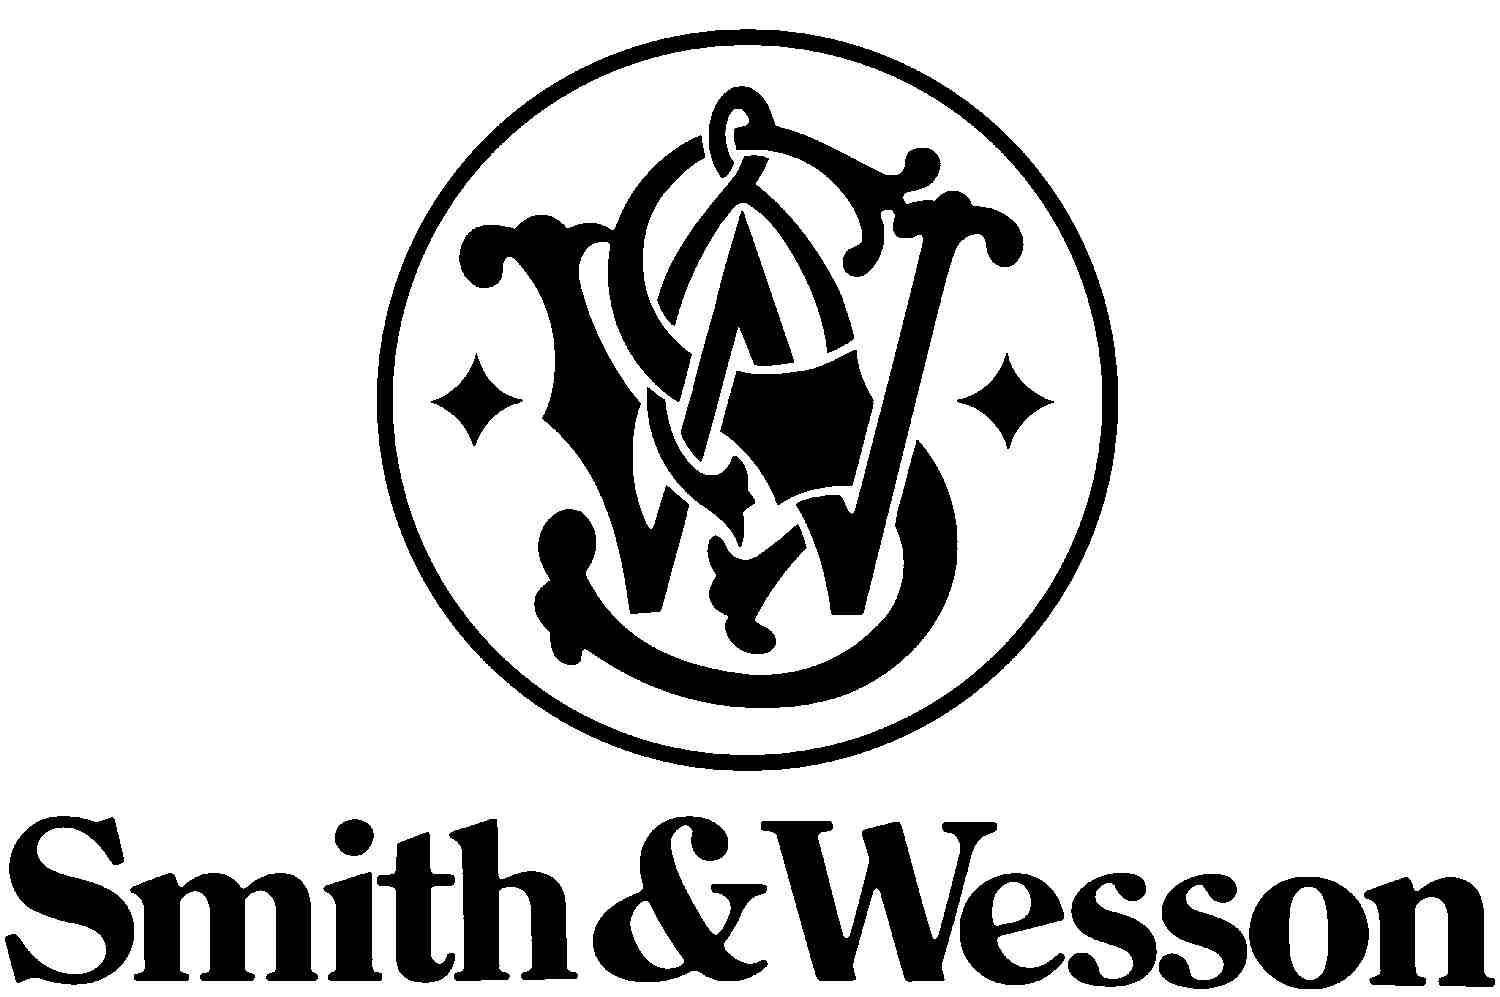 SMITH & WESSON.